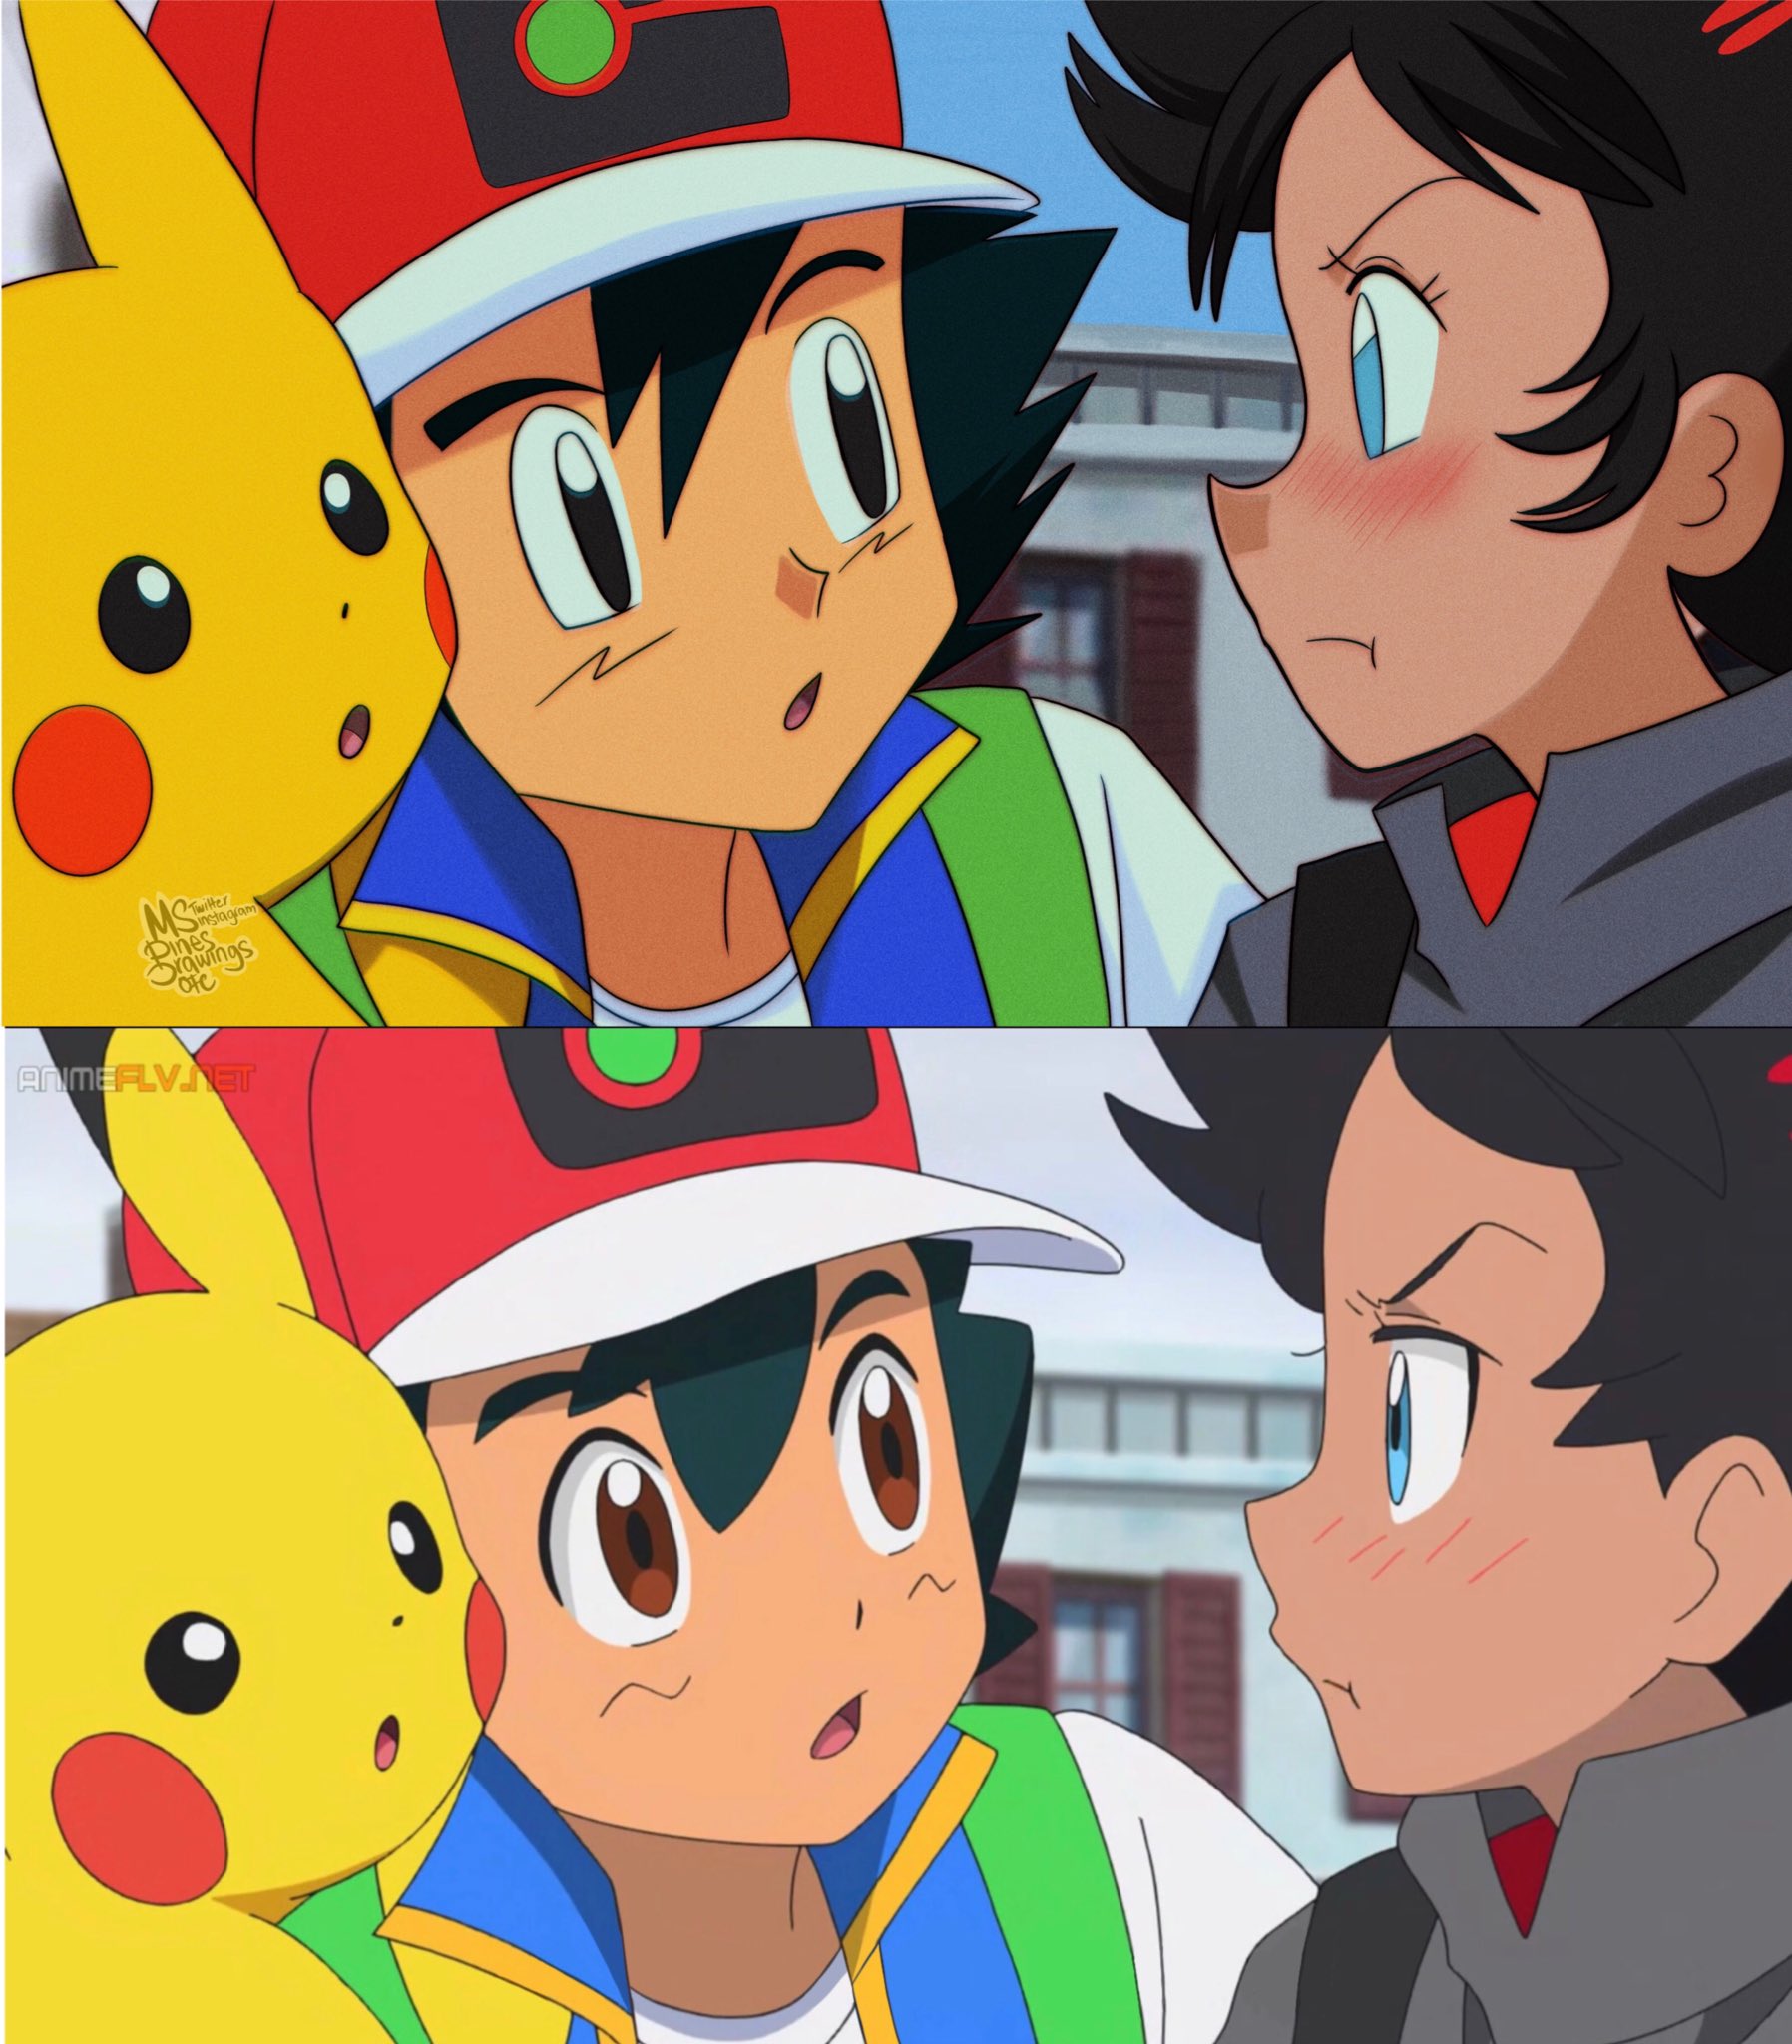 Why Does Pokemon Look So Different Now? - Anime News Network